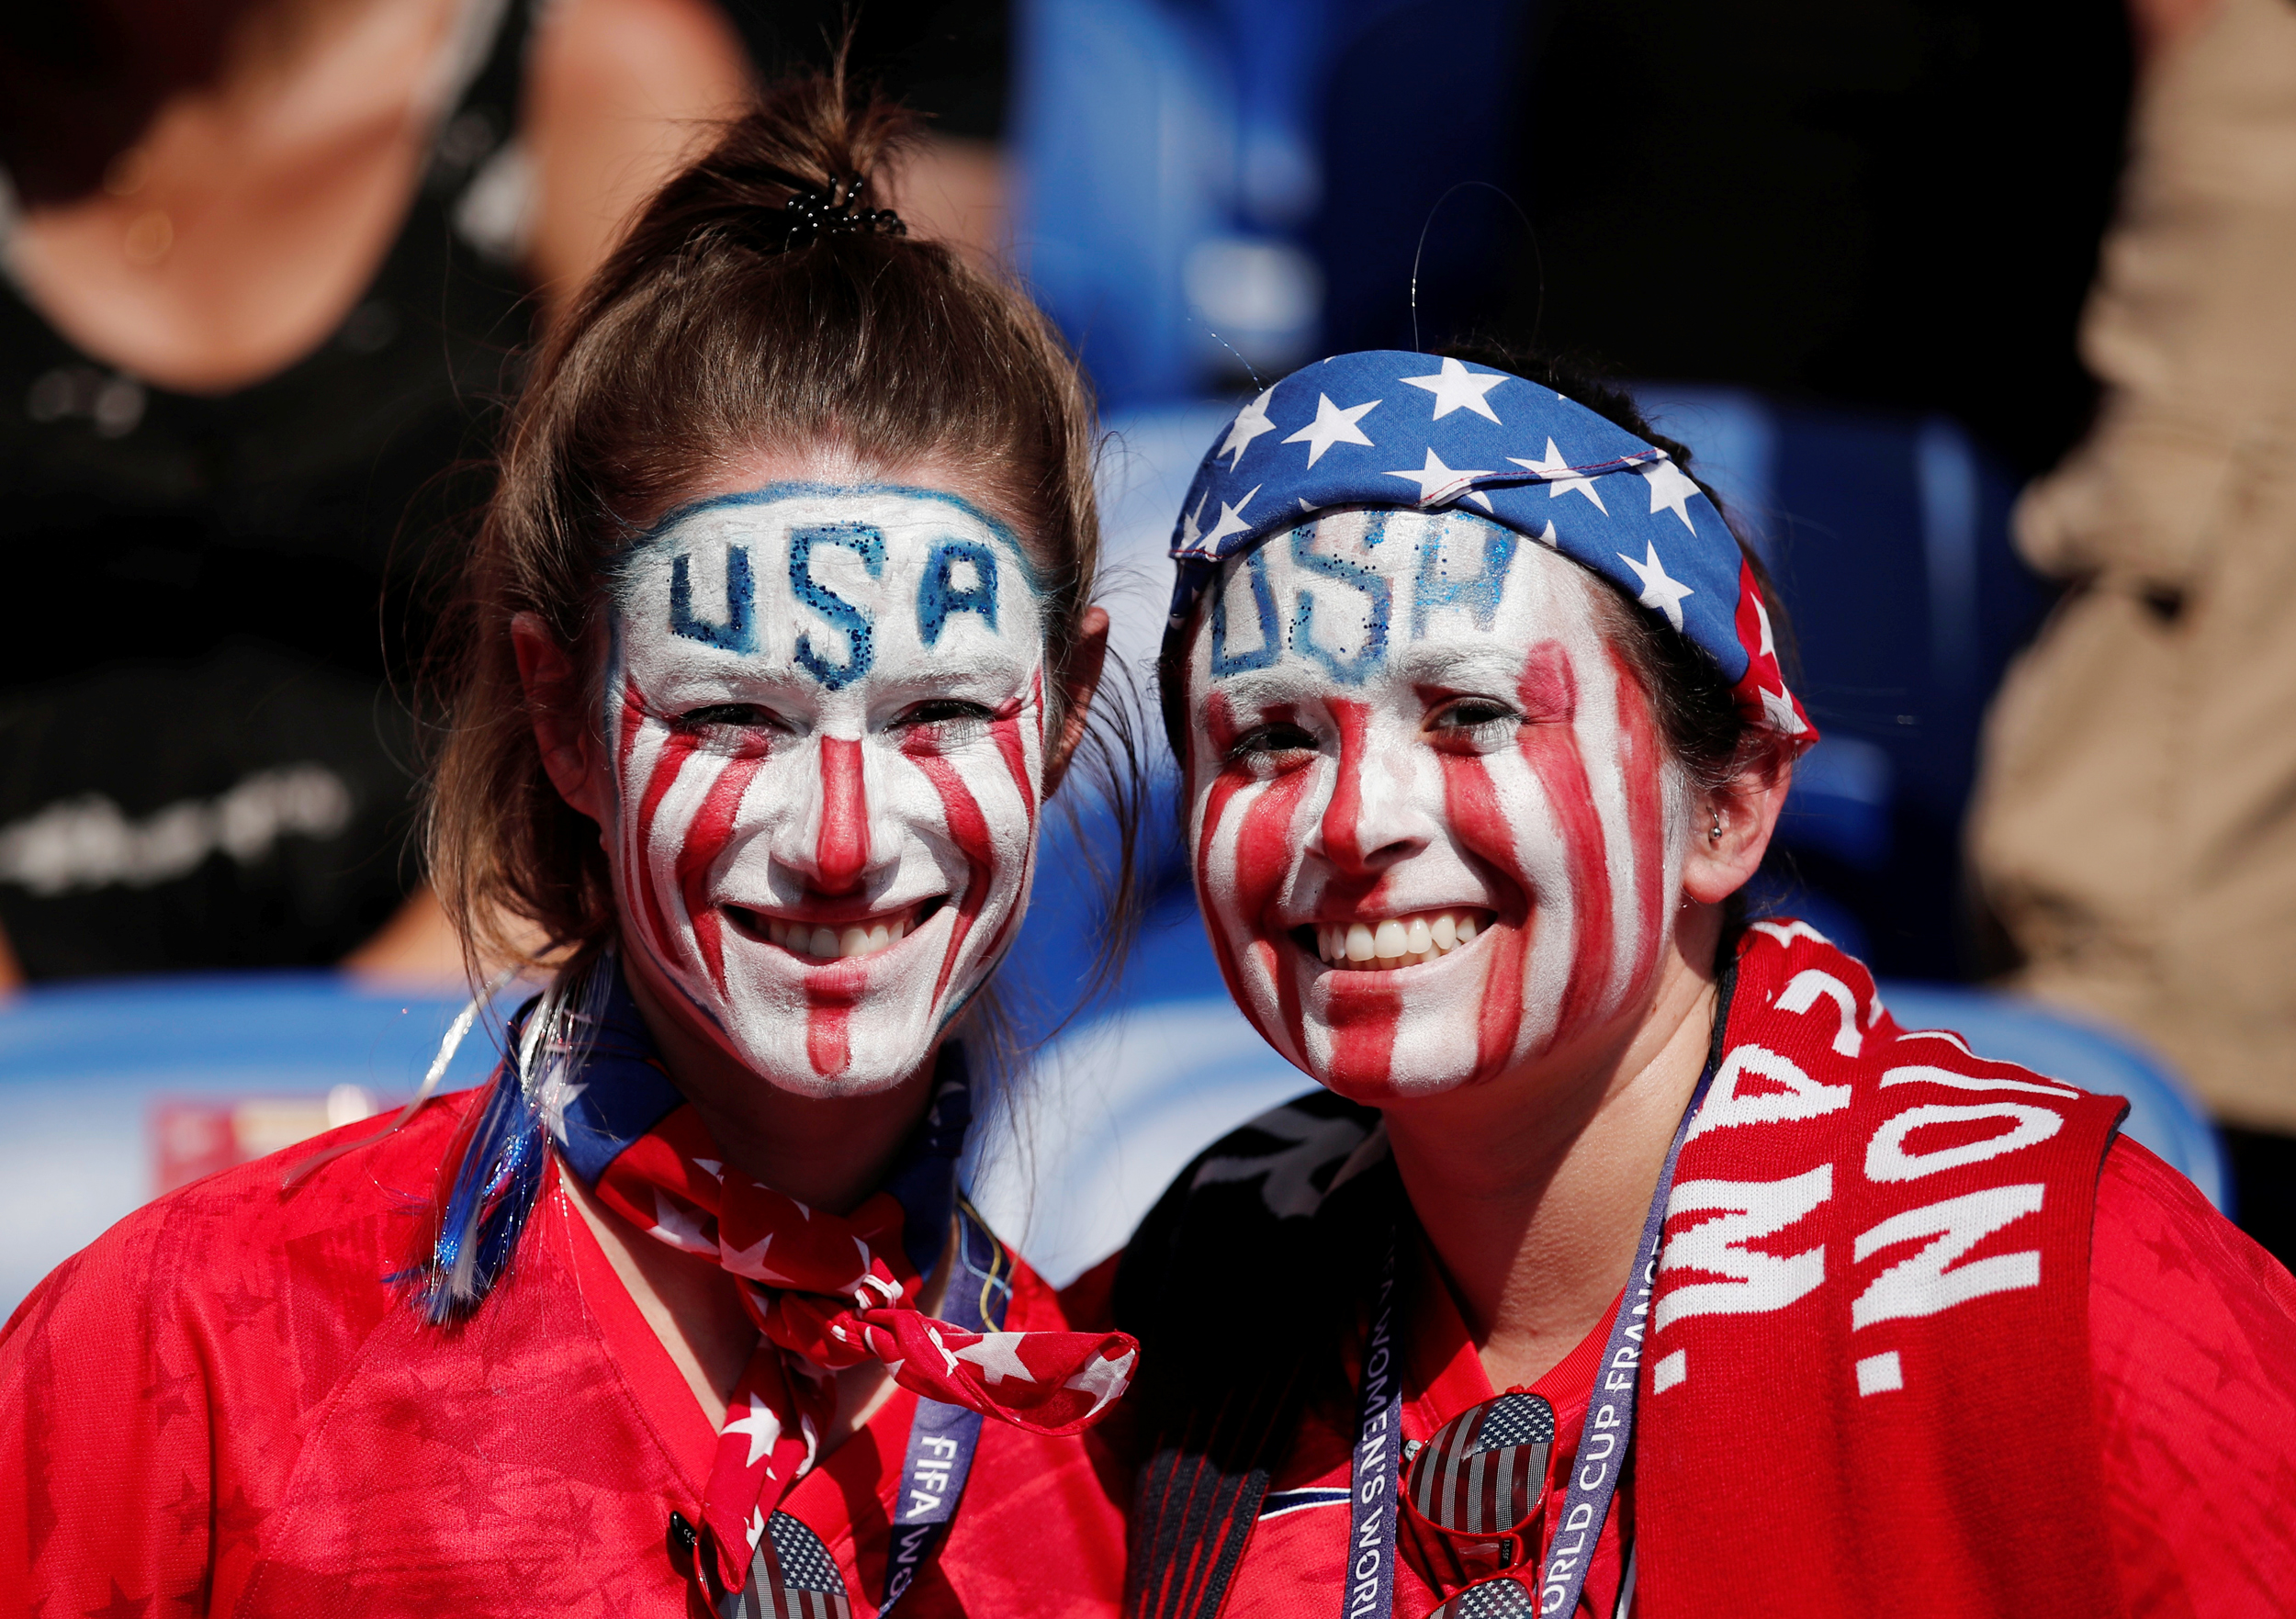 PHOTO: U.S. fans before the match between the U.S. and Netherlands, Lyon, France, July 7,2019.